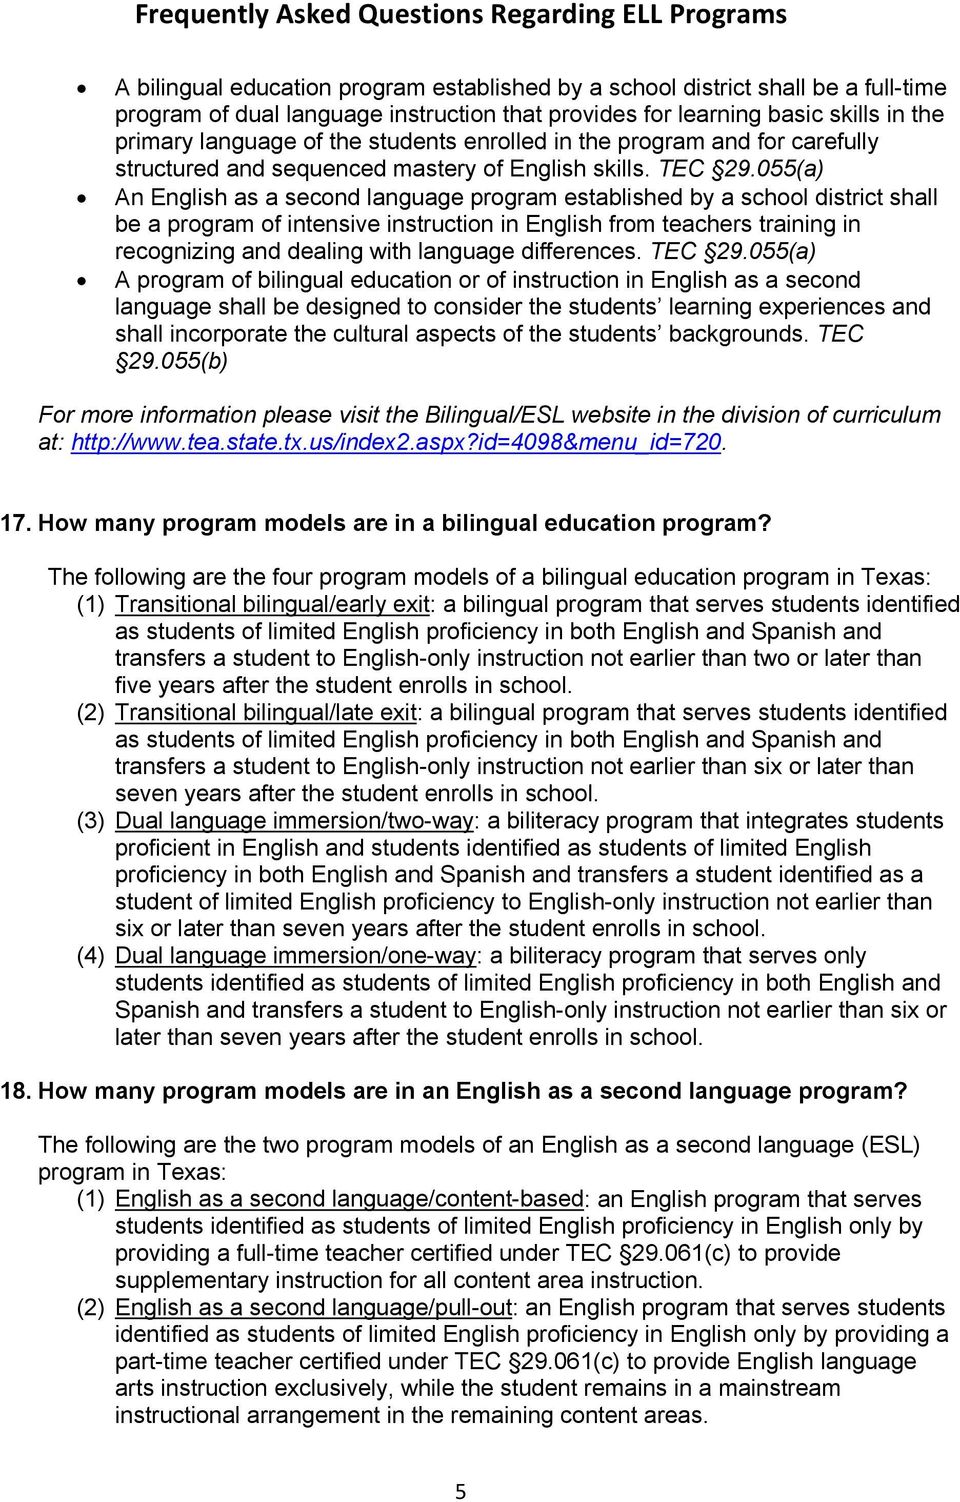 055(a) An English as a second language program established by a school district shall be a program of intensive instruction in English from teachers training in recognizing and dealing with language